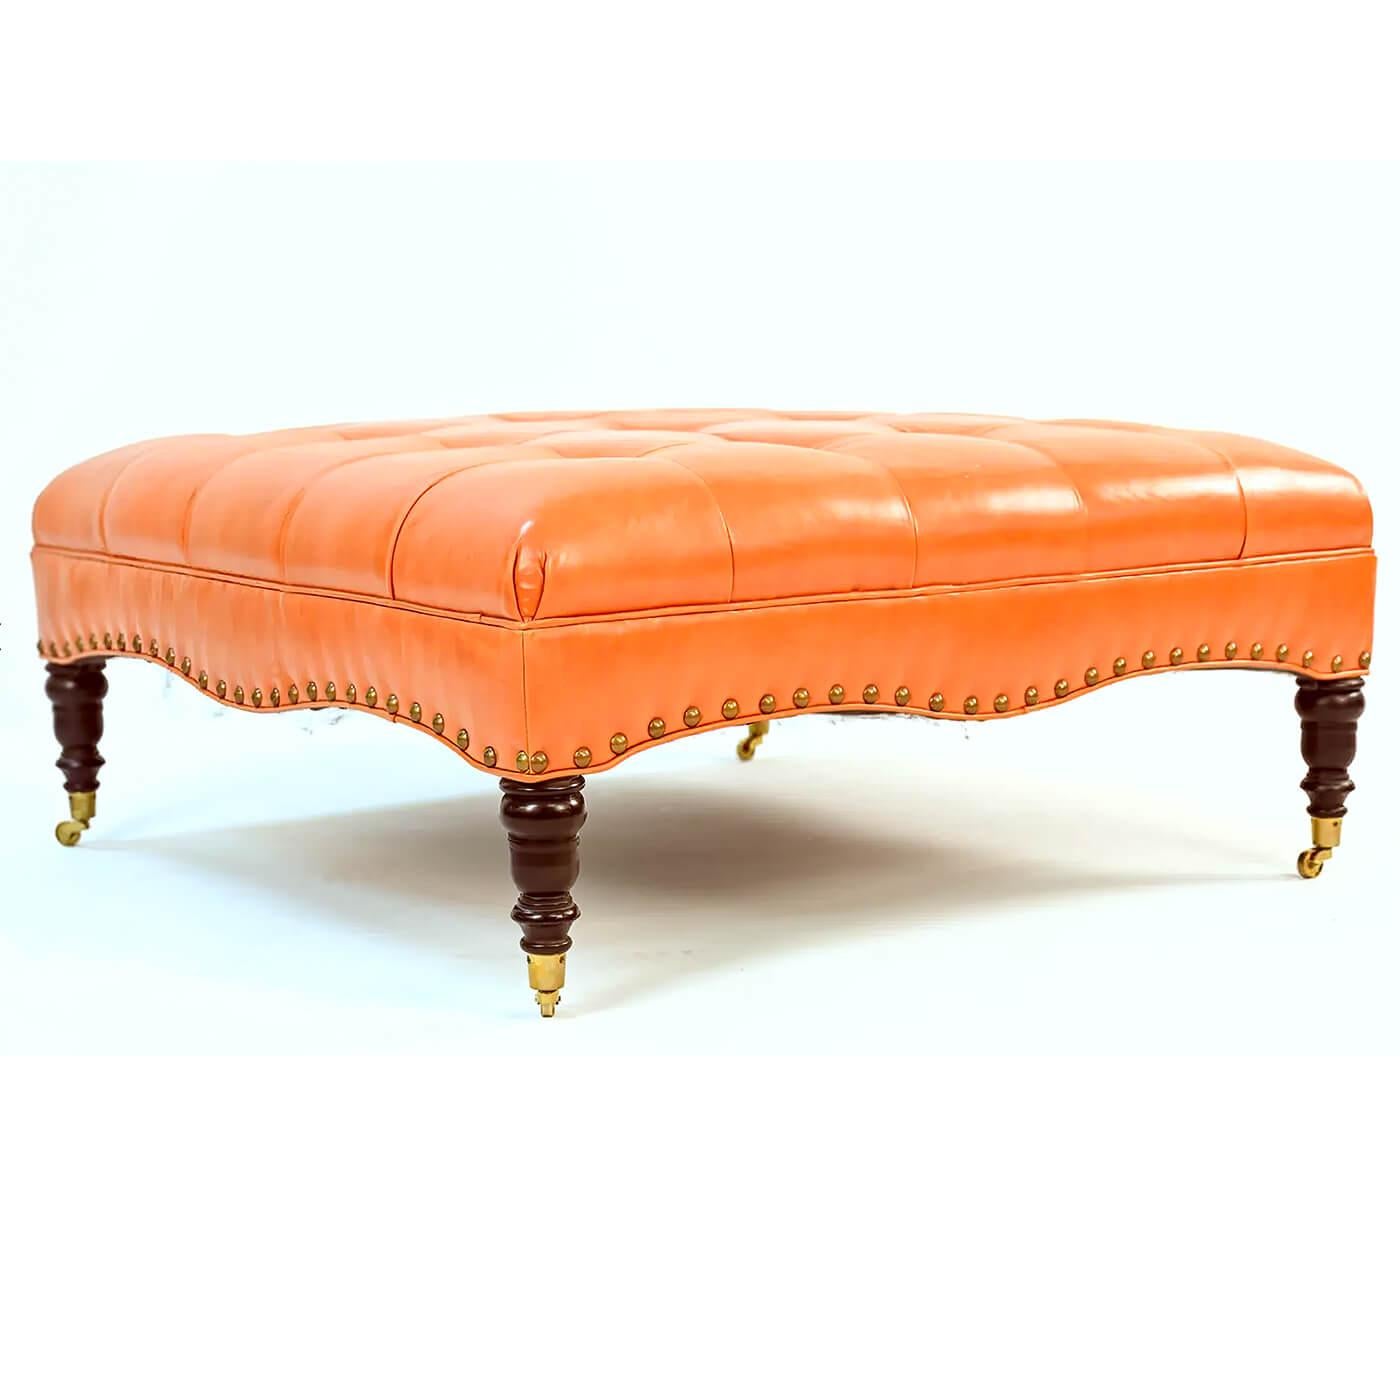 A large classic tufted orange leather upholstered square ottoman with serpentine rails having large brass nailhead details and raised on turned legs with brass caster feet.

Late 20th century 

Dimensions: 42.5